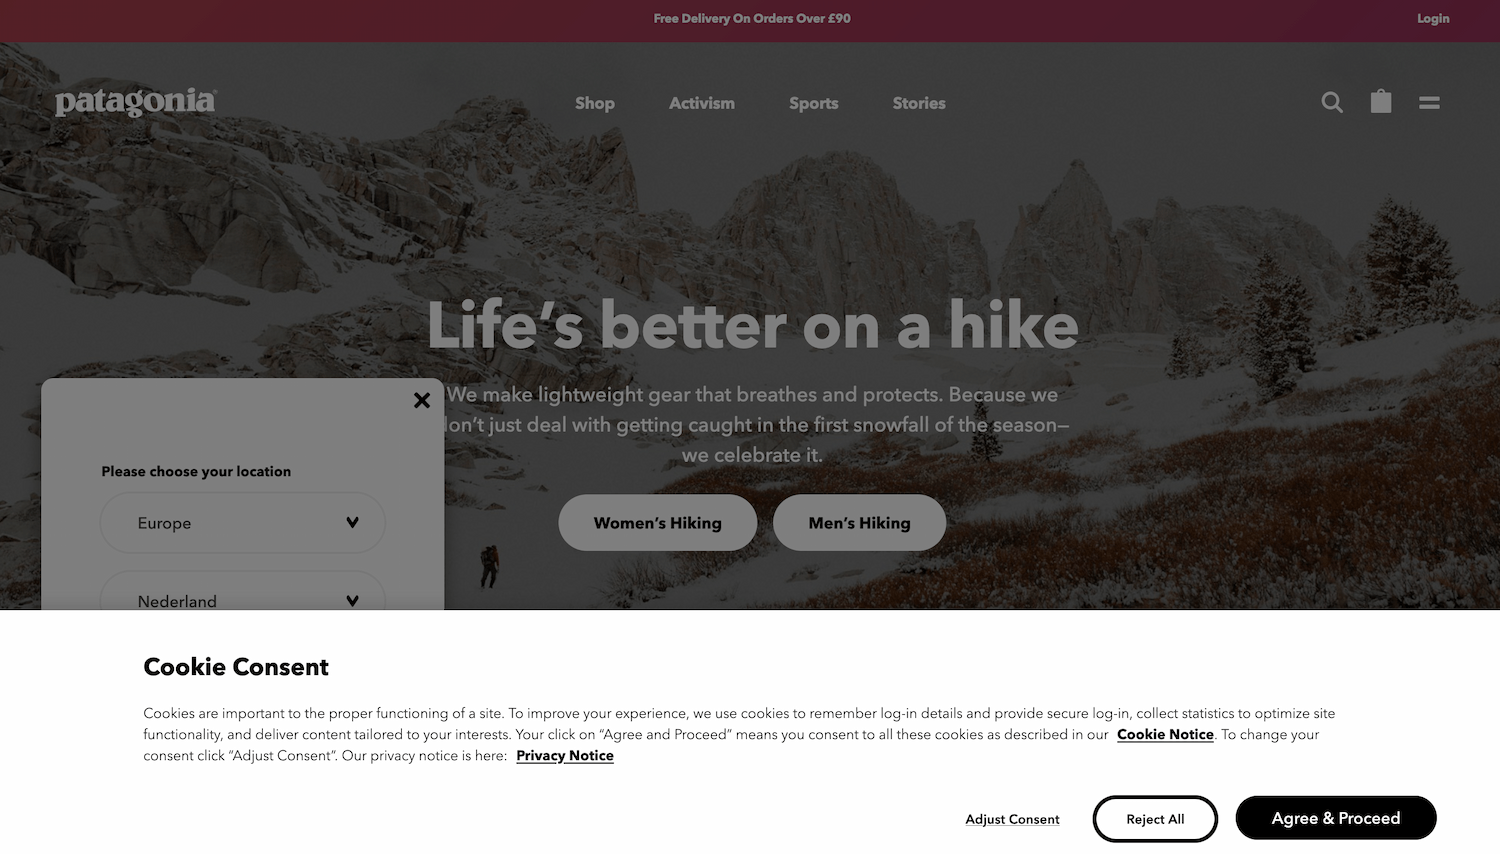 patagonia homepage that is dimmed with a not dimmed cookie consent form laying on the top, with choice between accept all cookies and cookie settings